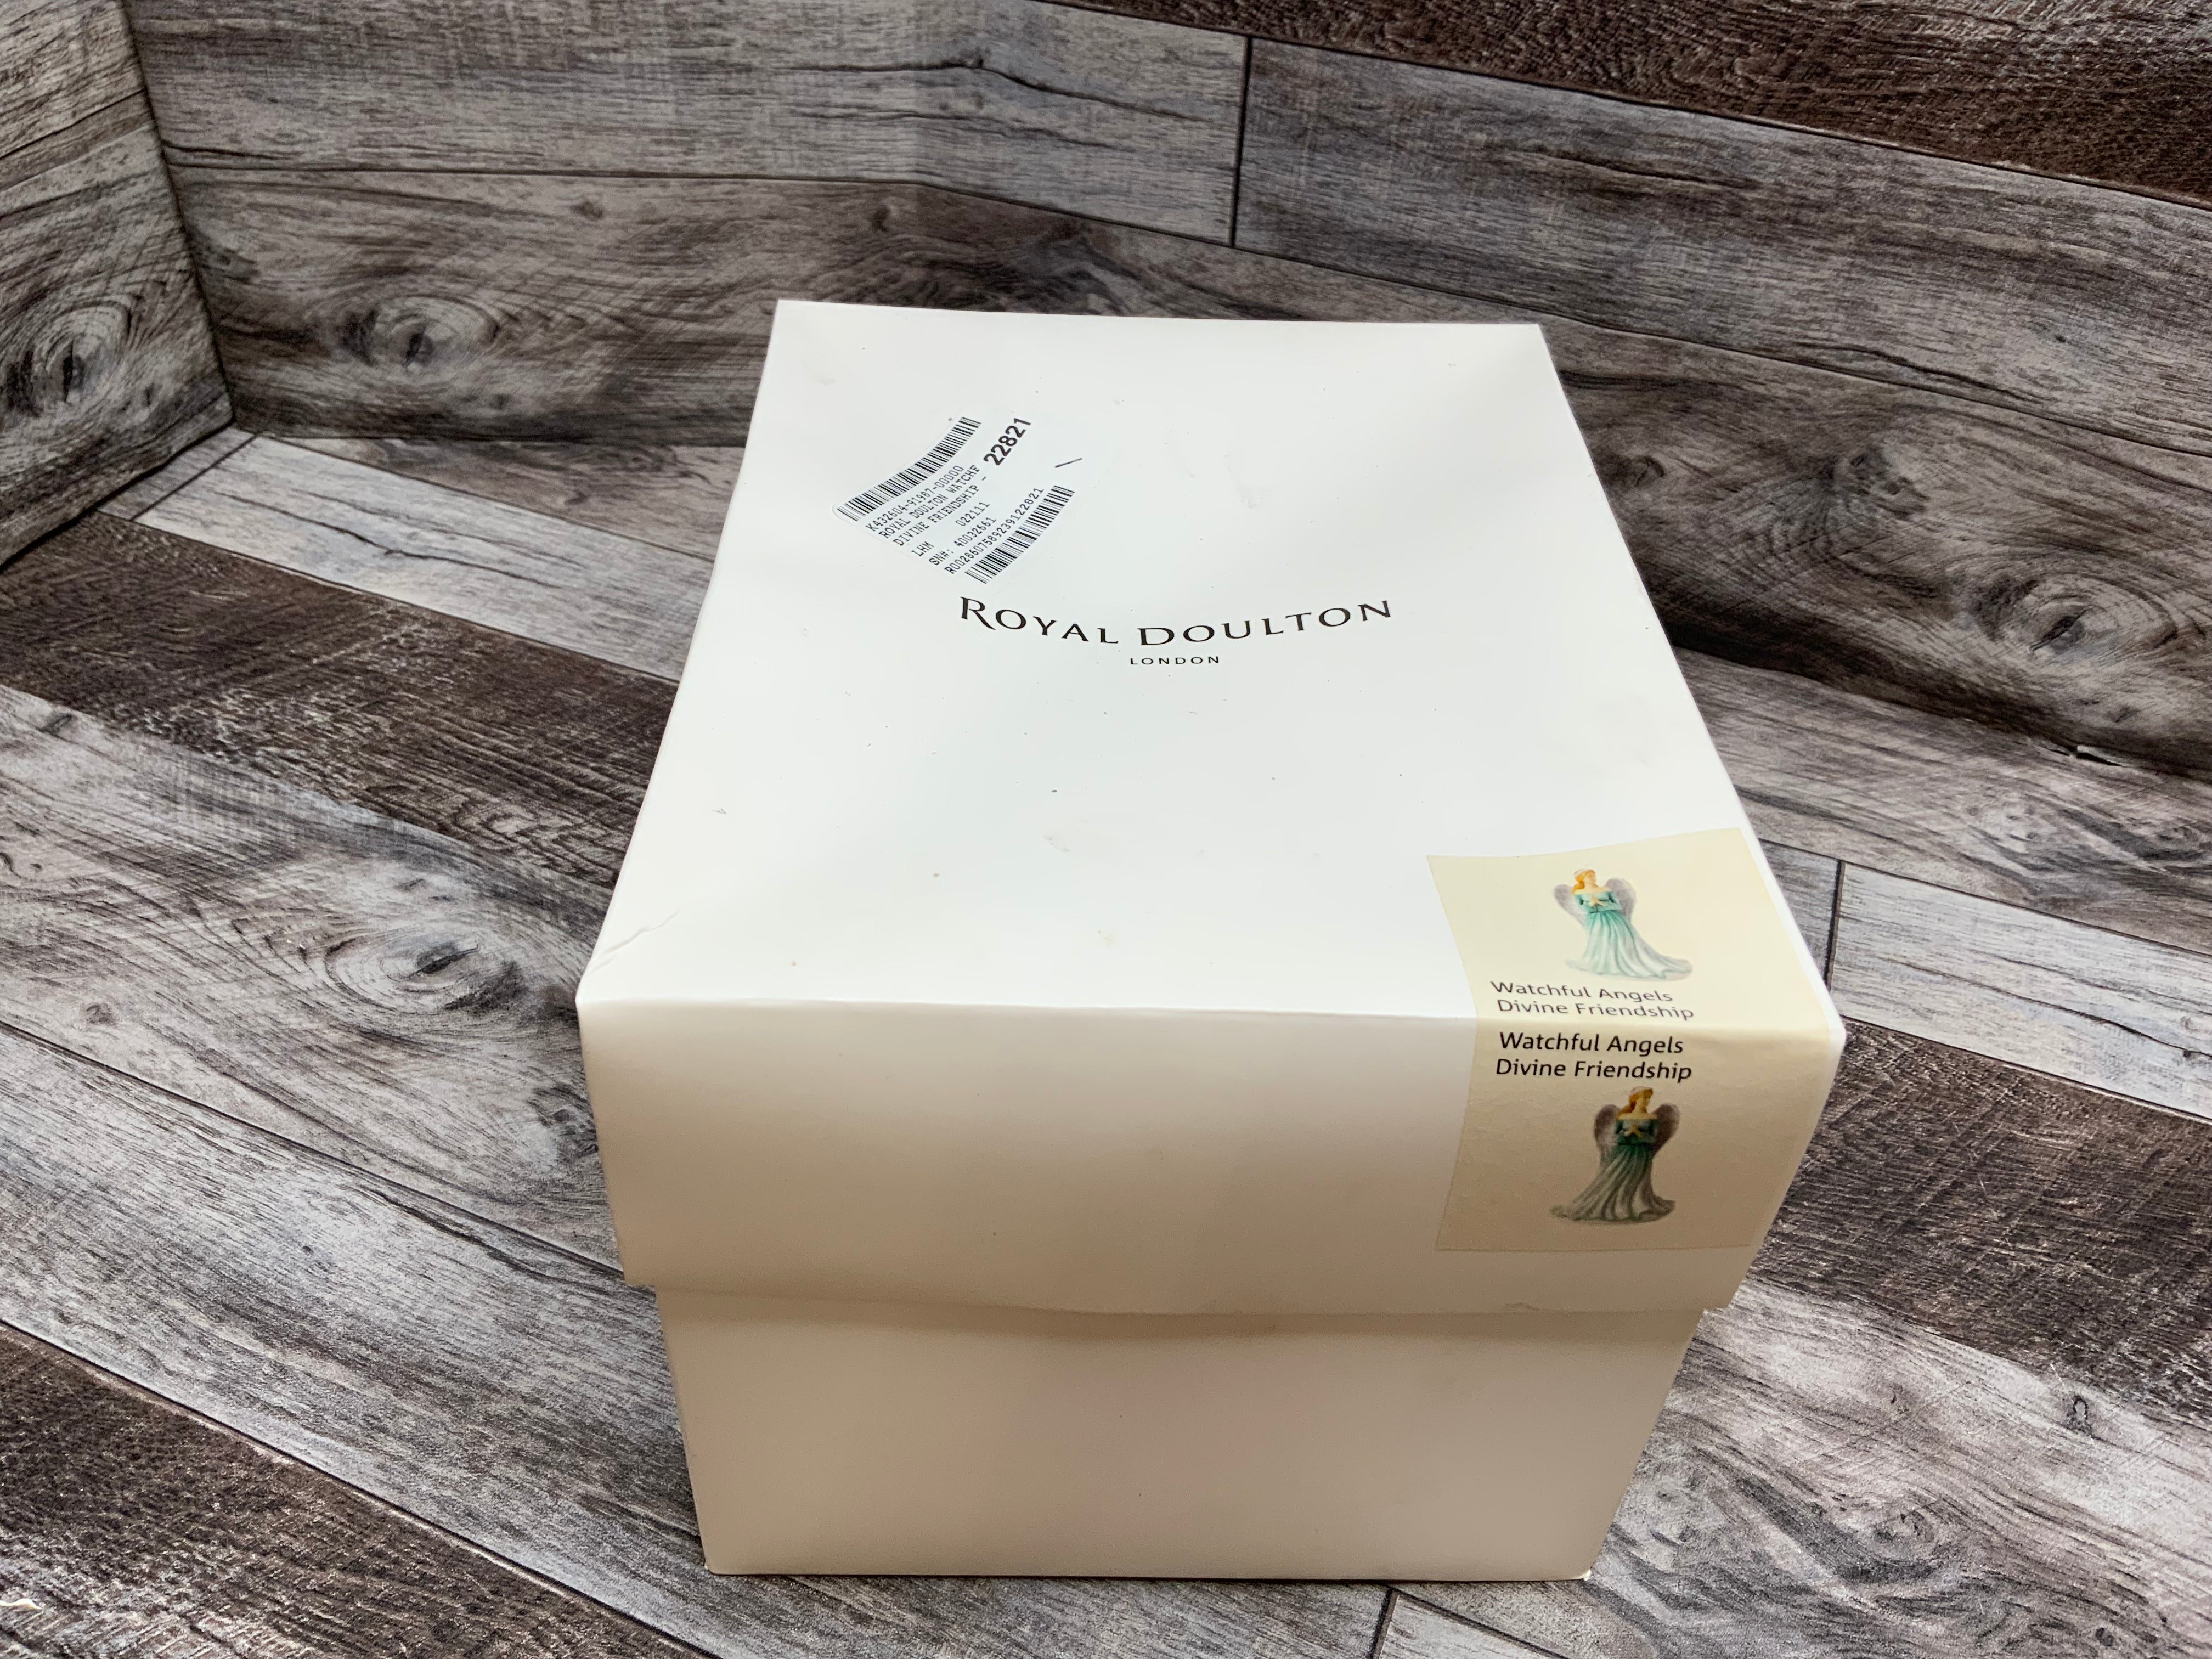 Royal Doulton - Watchful Angels - Divine Friendship **OPEN BOX** (8214319202542)